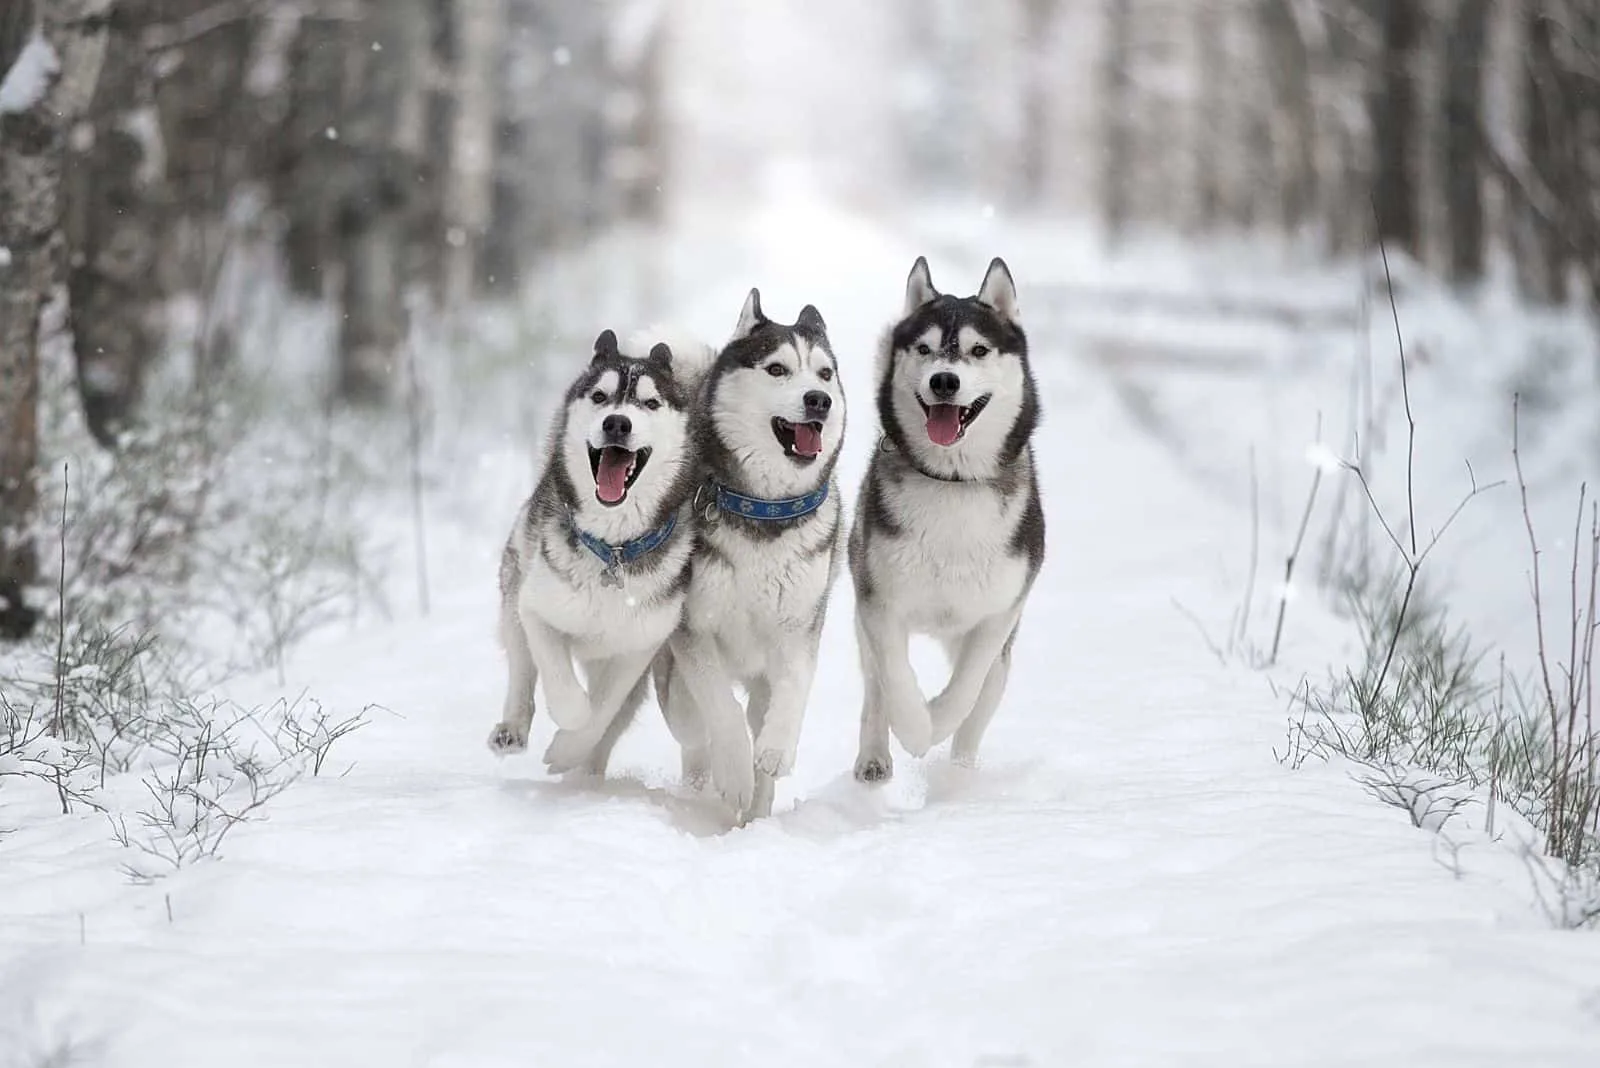 three siberian husky dogs running in the snowy forest